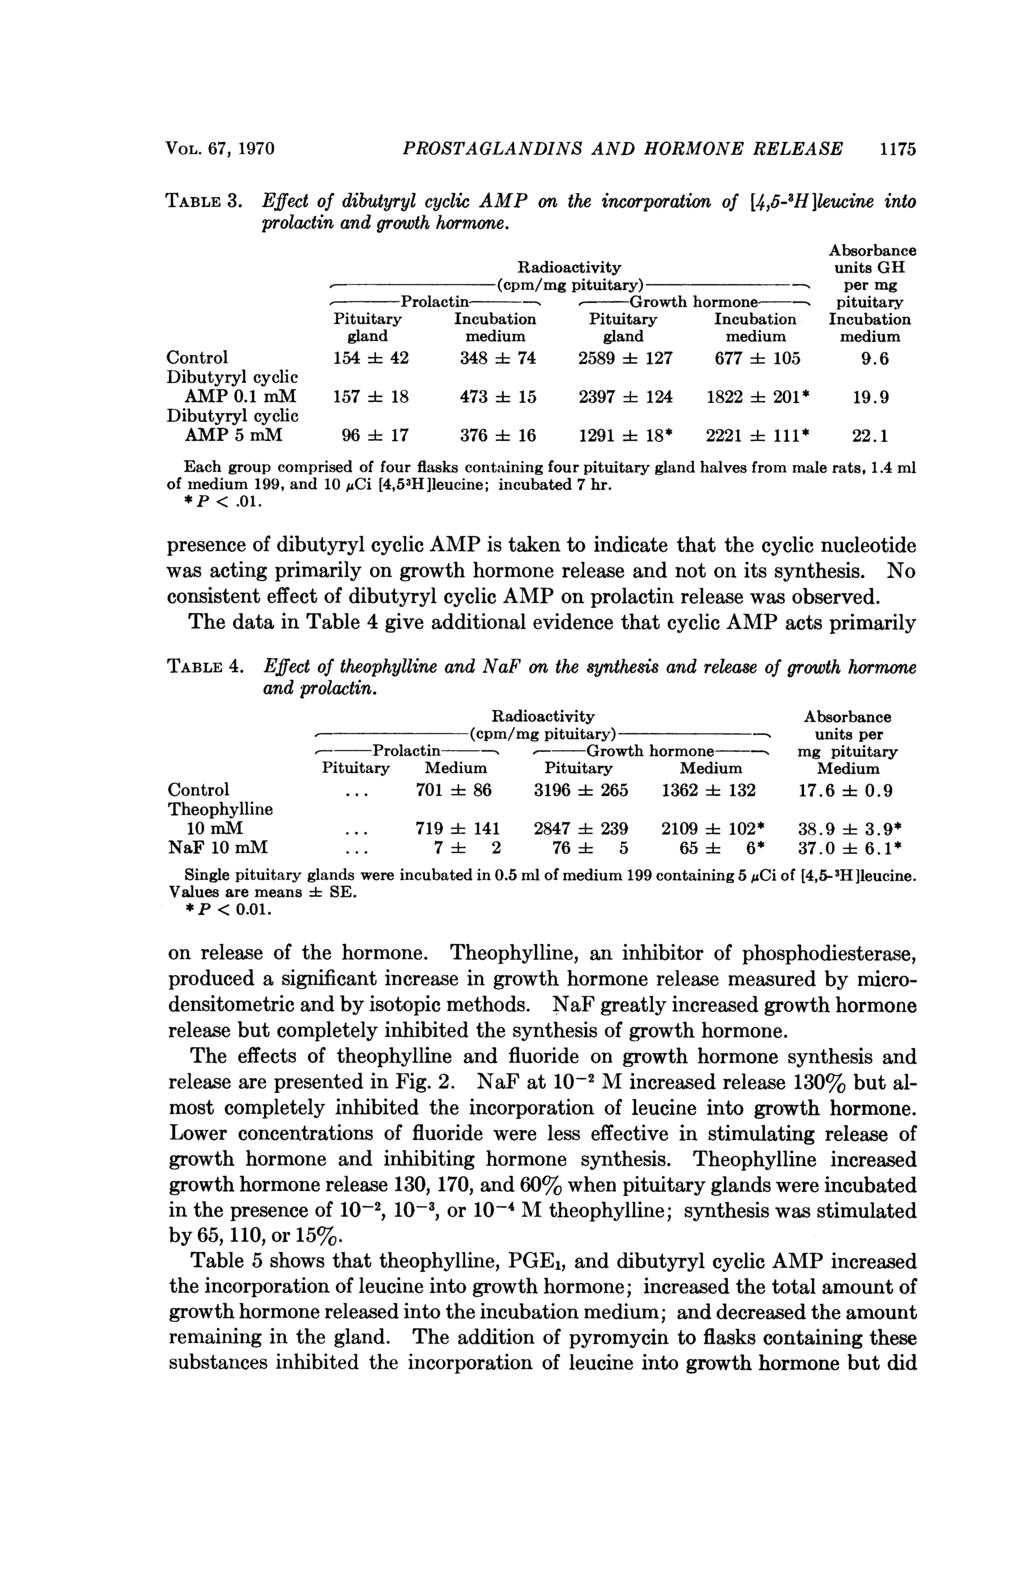 VOL. 67, 1970 PROSTAGLANDINS AND HORMONE RELEASE 1175 TABLE 3. Effect of dibutyryl cyclic AMP on the incorporation of [4,5-3H]leucine into prolactin and growth hormone.